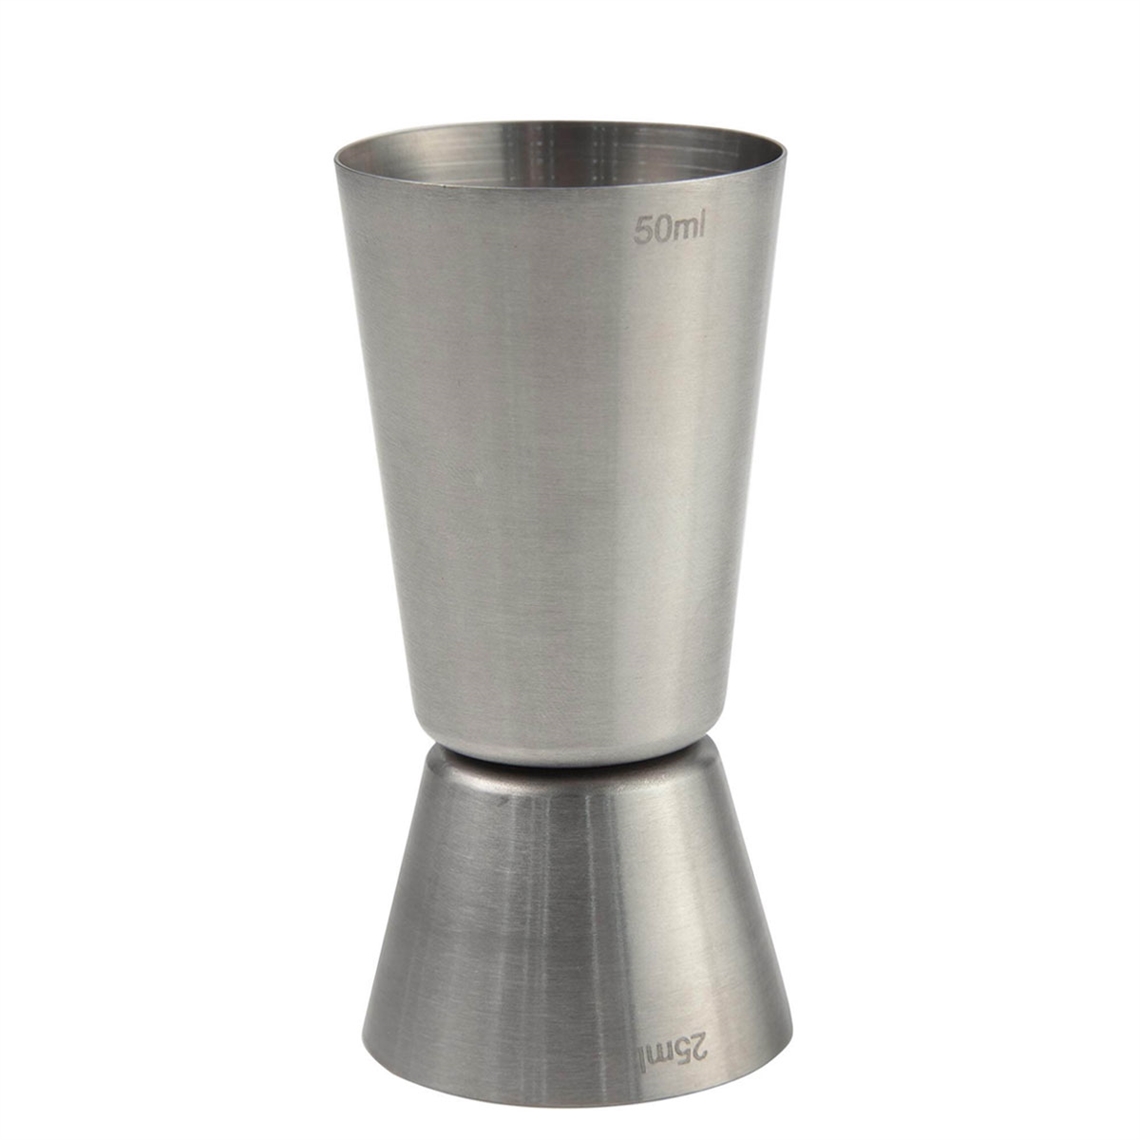 View more elia crystal from our Spirit and Wine Bar Thimble Measures range